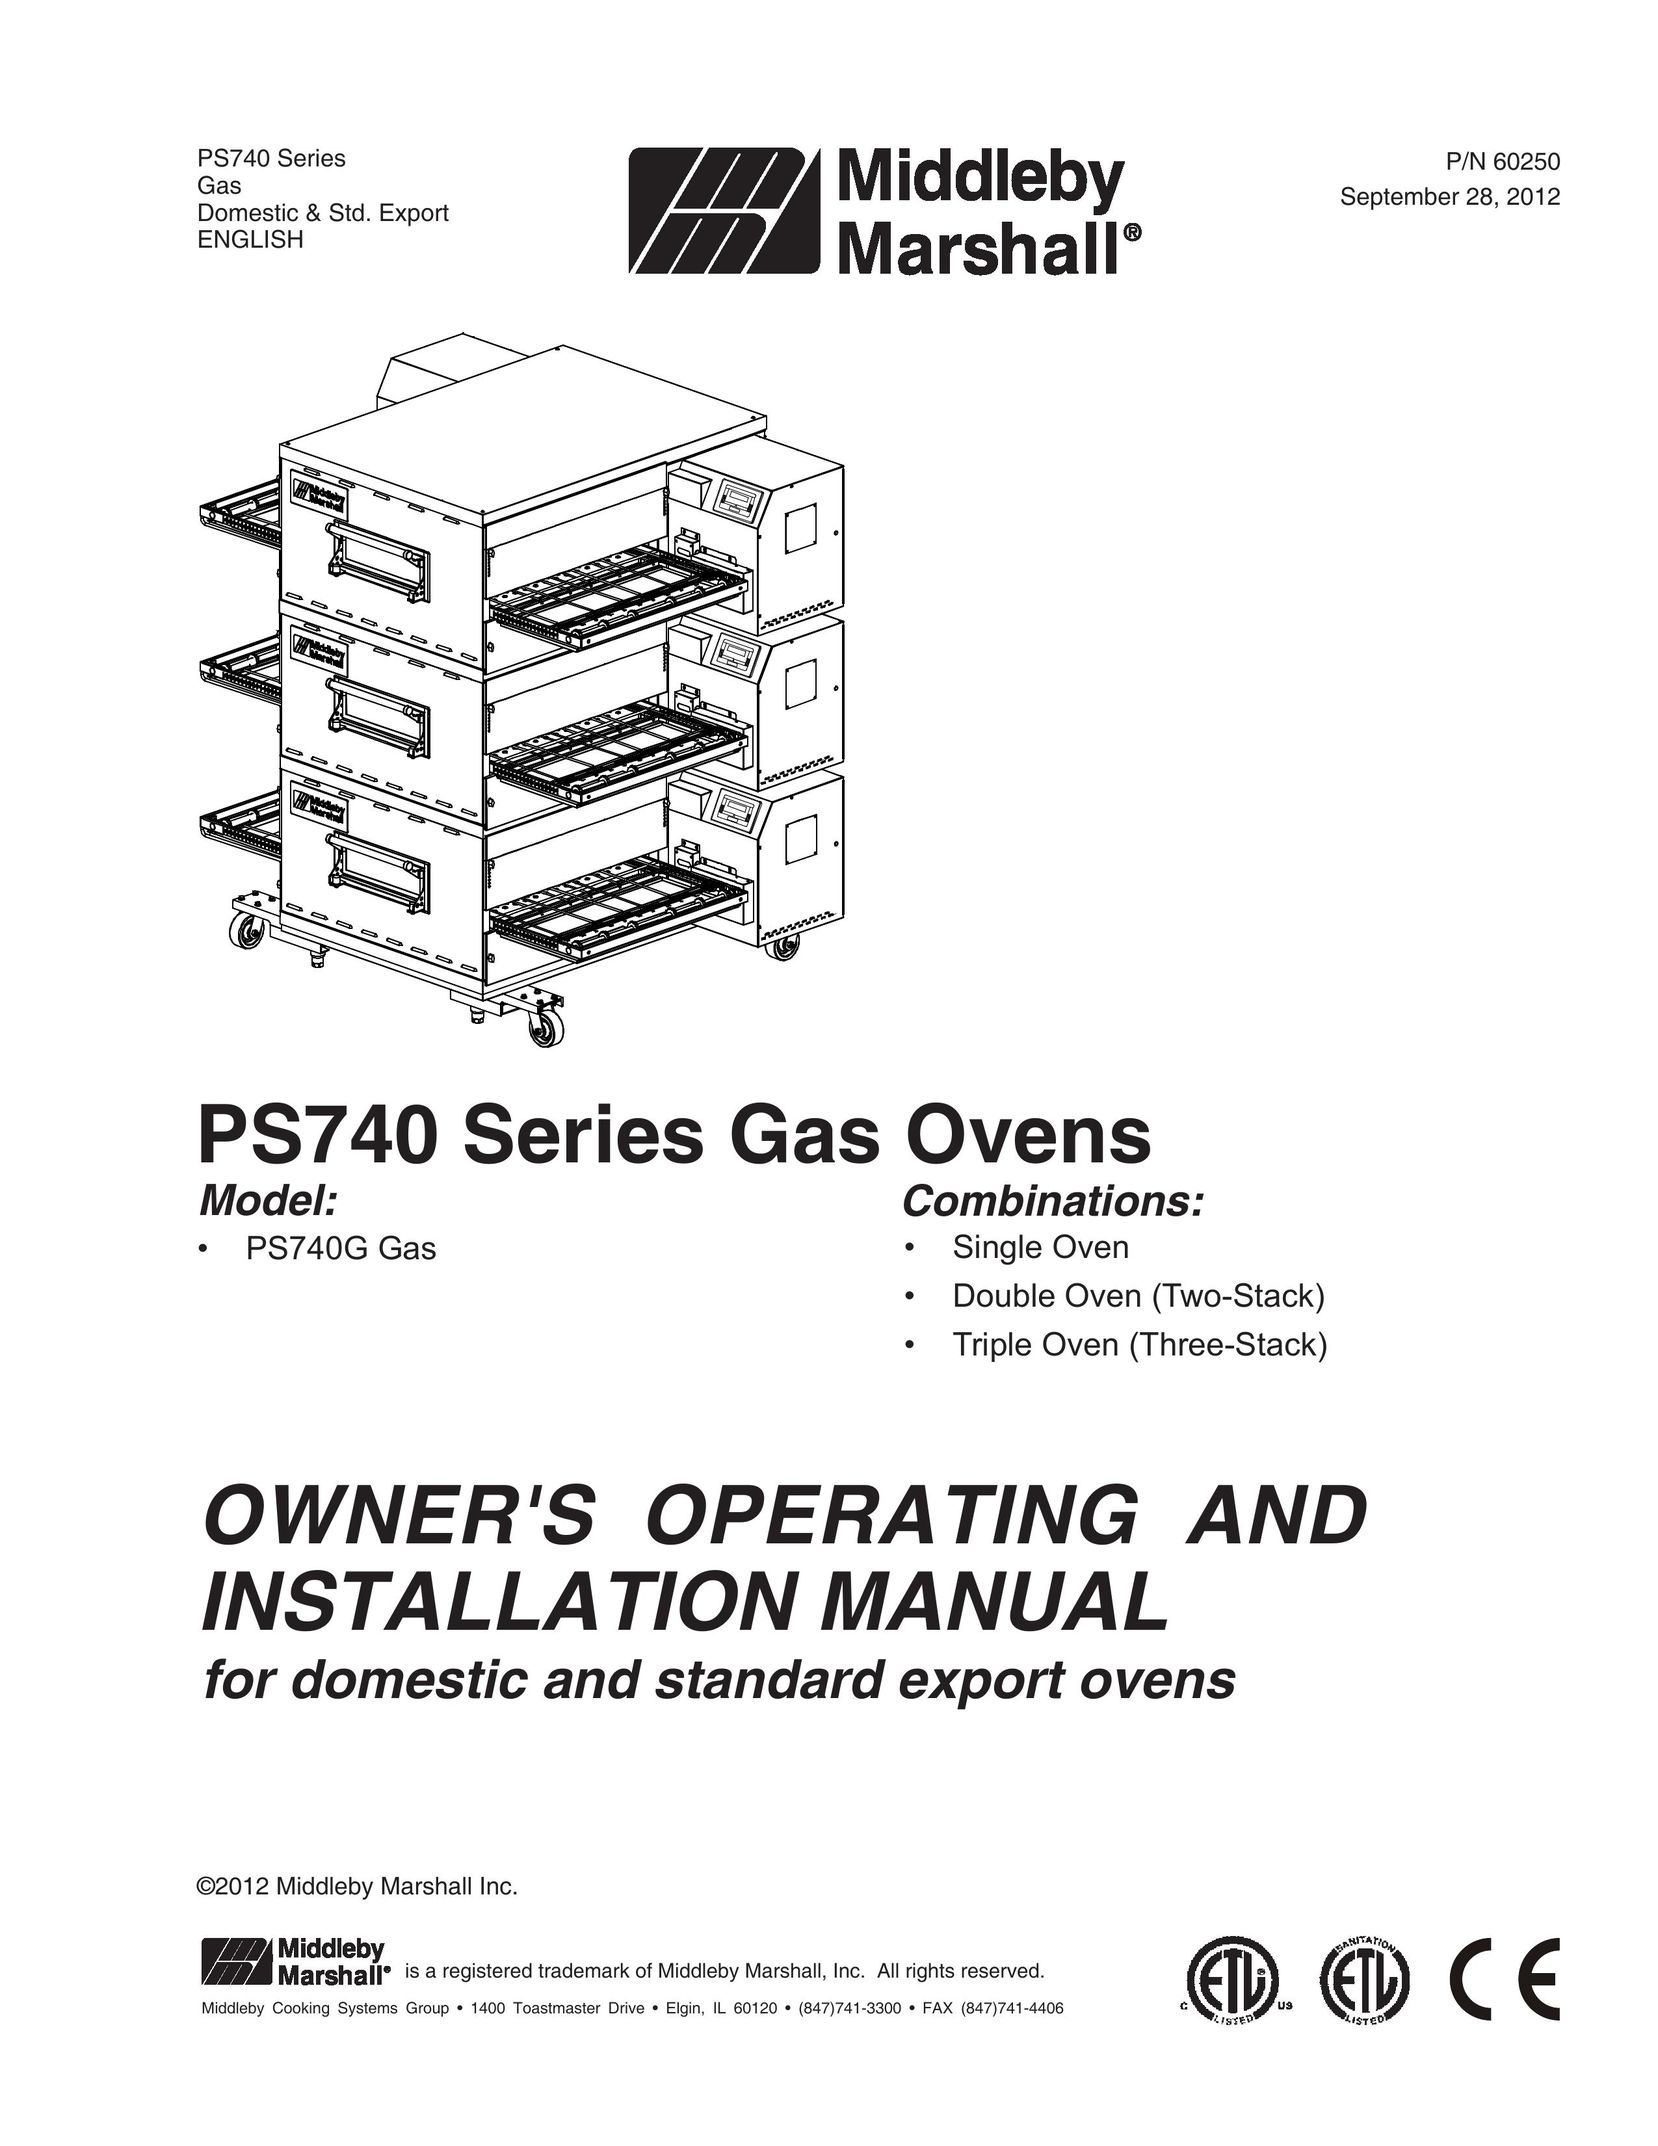 Middleby Marshall P/N 60250 Oven User Manual